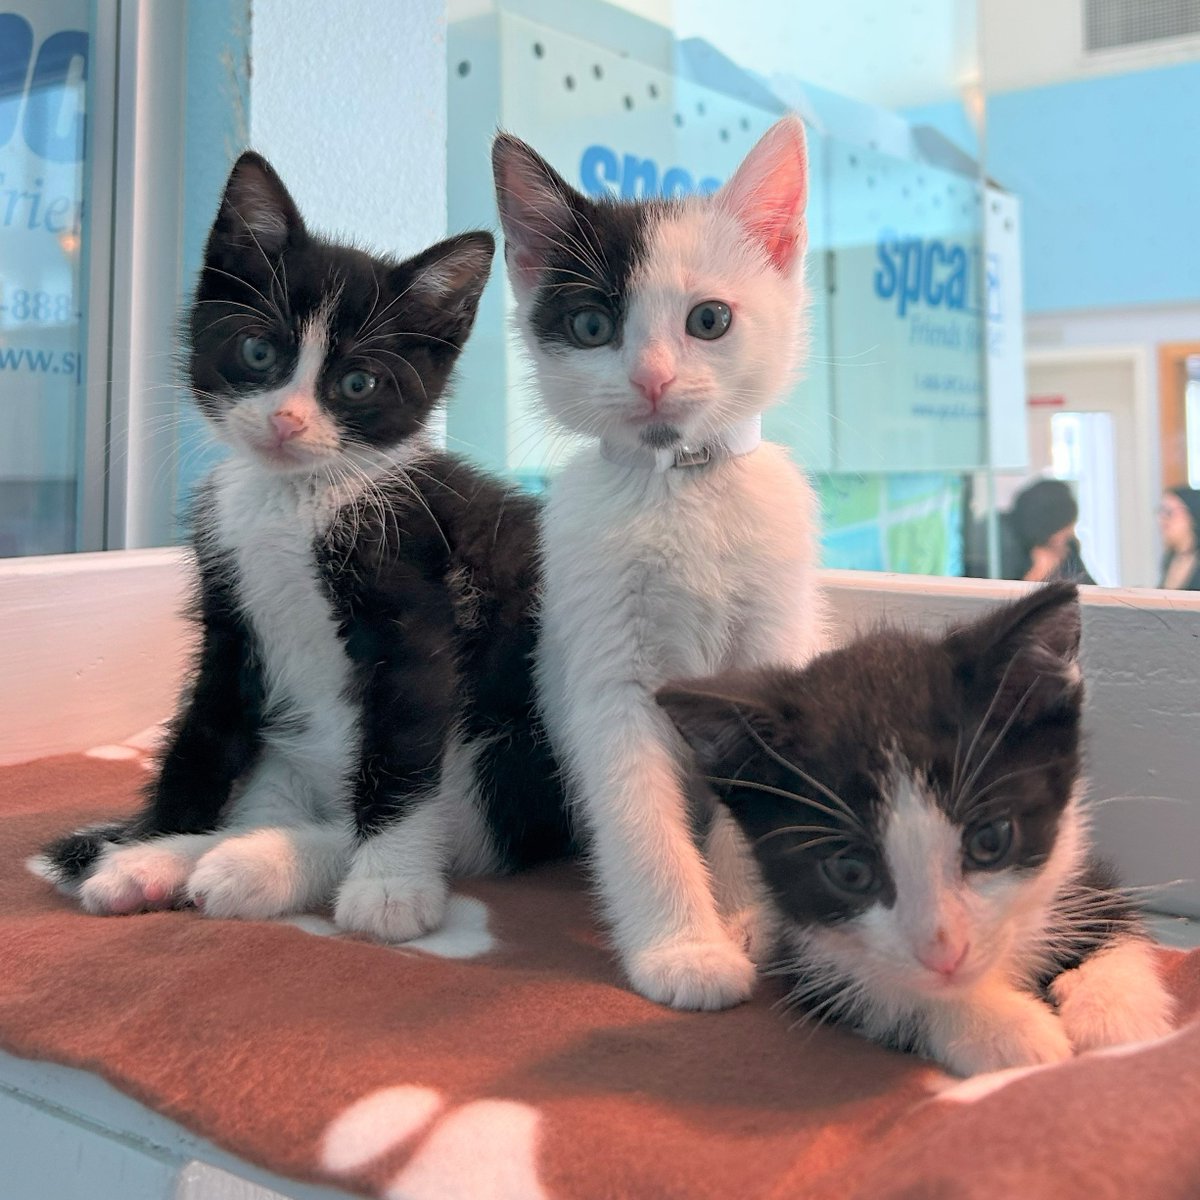 Three times the cuteness, three times the love 😇💞 Until the end of May, adoption fees for cats & kittens are $25!
tinyurl.com/mrx6vxc3